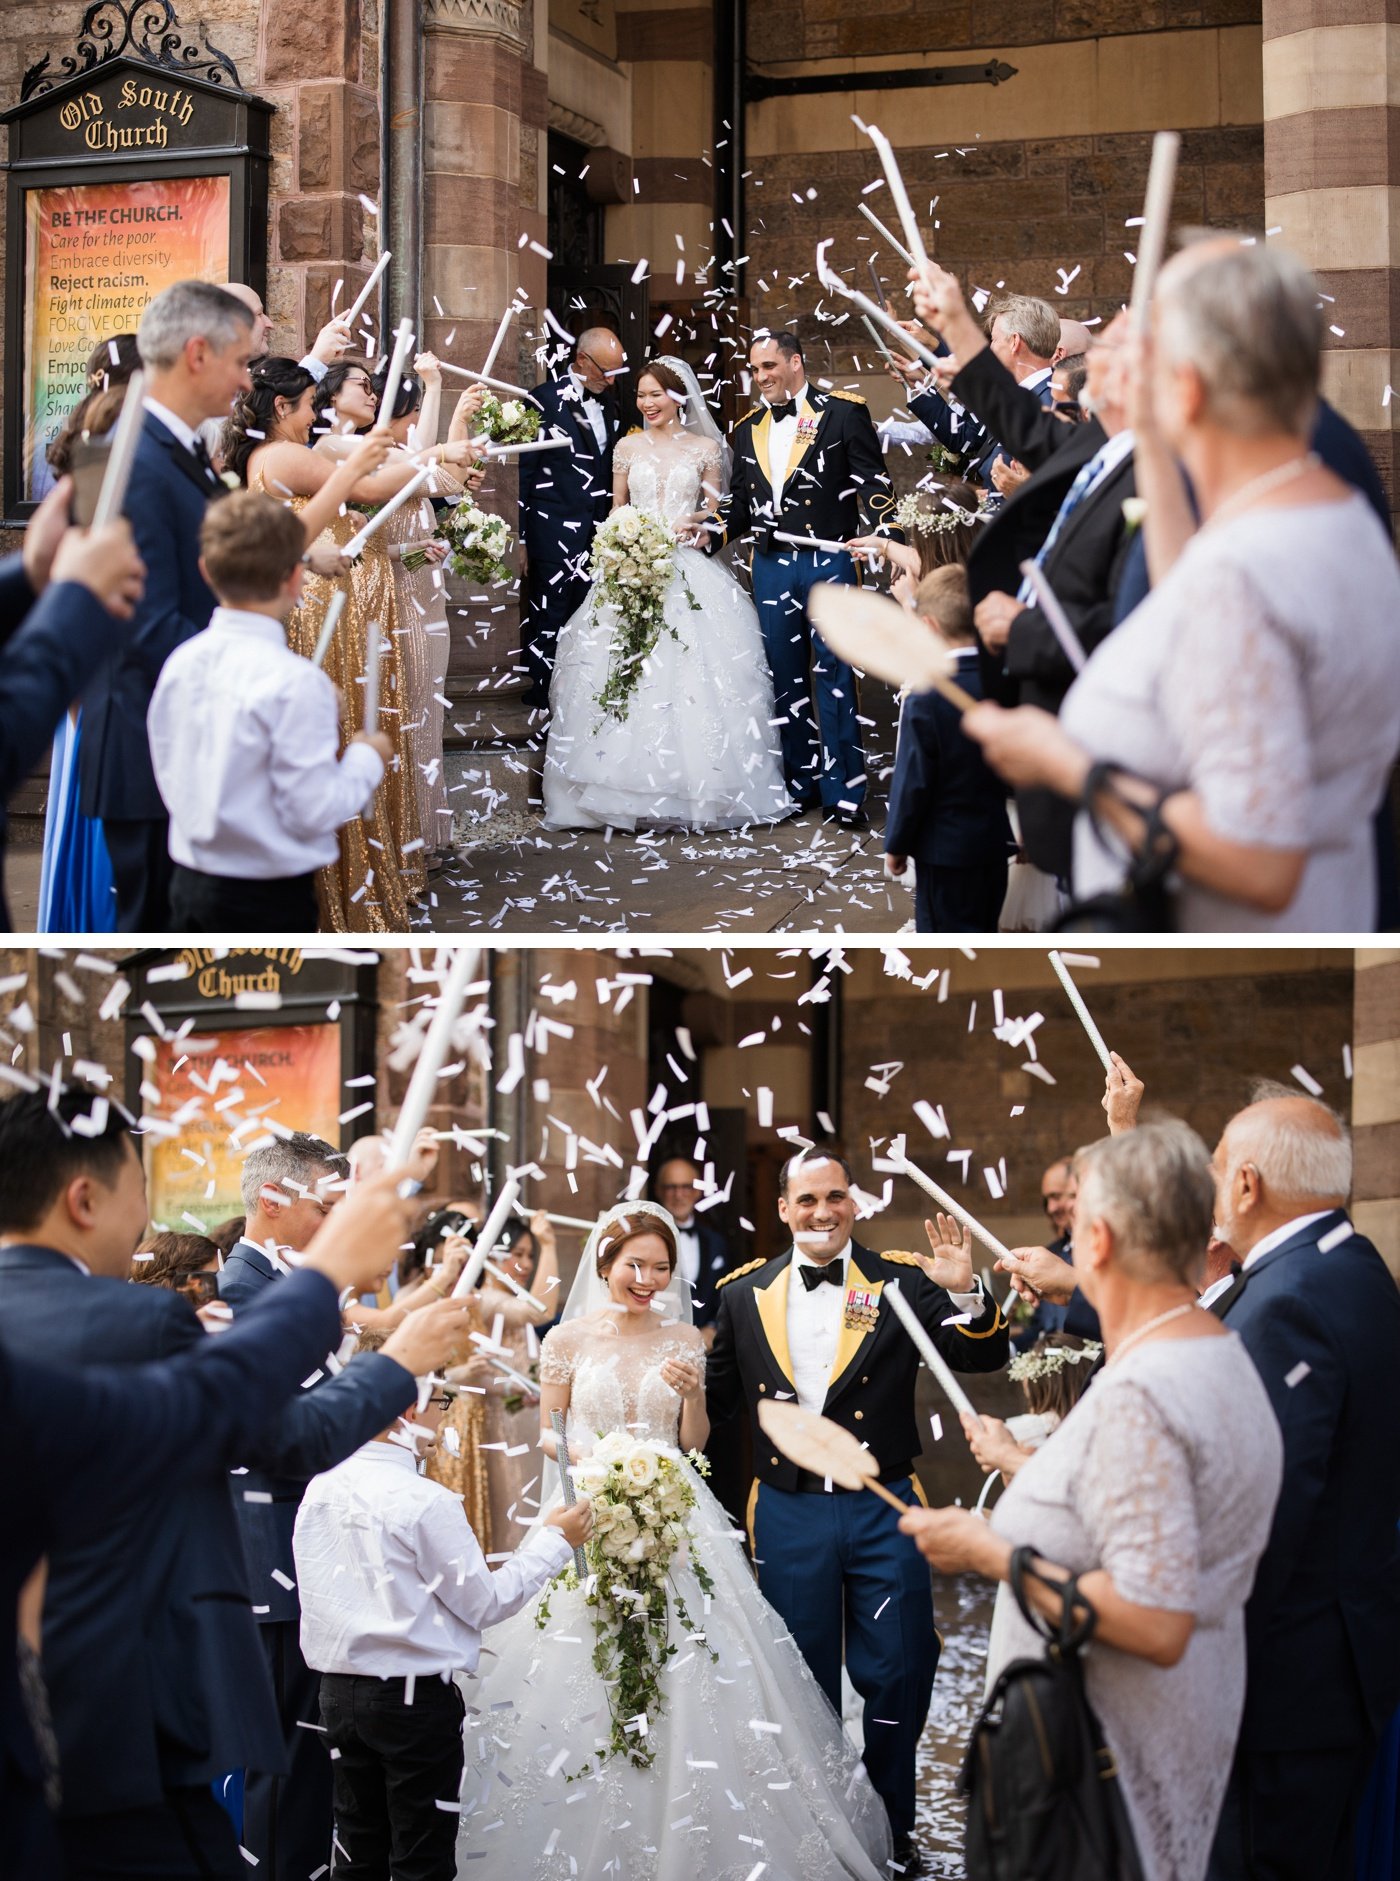 Bride and groom being showered with confetti after their wedding ceremony at Old South Church